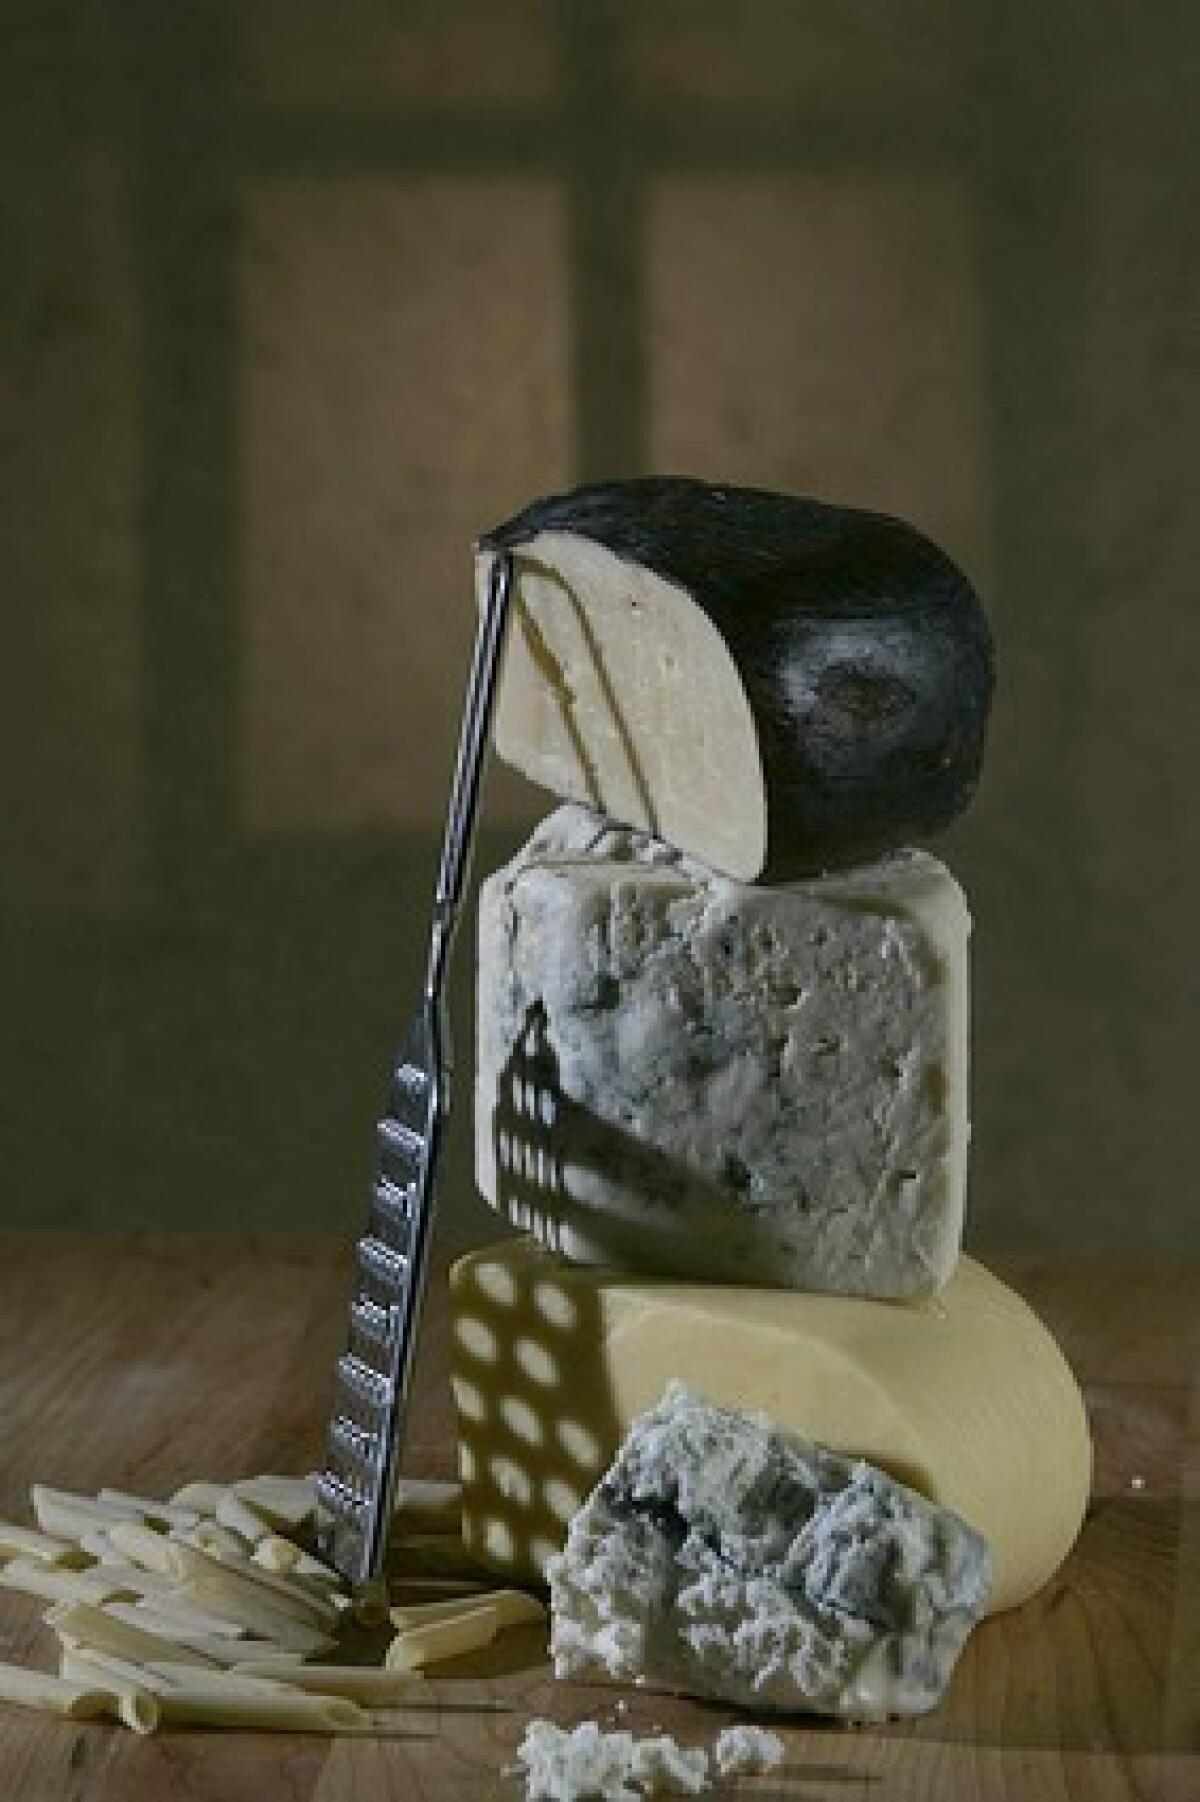 Gorgeous American cheeses  from top, Vella Dry Jack, Rogue Creamery Smokey Blue, Sonoma Cheeses Sonoma Jack and Cypress Groves Humboldt Fog chèvre  can transform classic pasta dishes such as pasta ai quattro formaggi. When playing matchmaker, insist on top-quality pastas too.